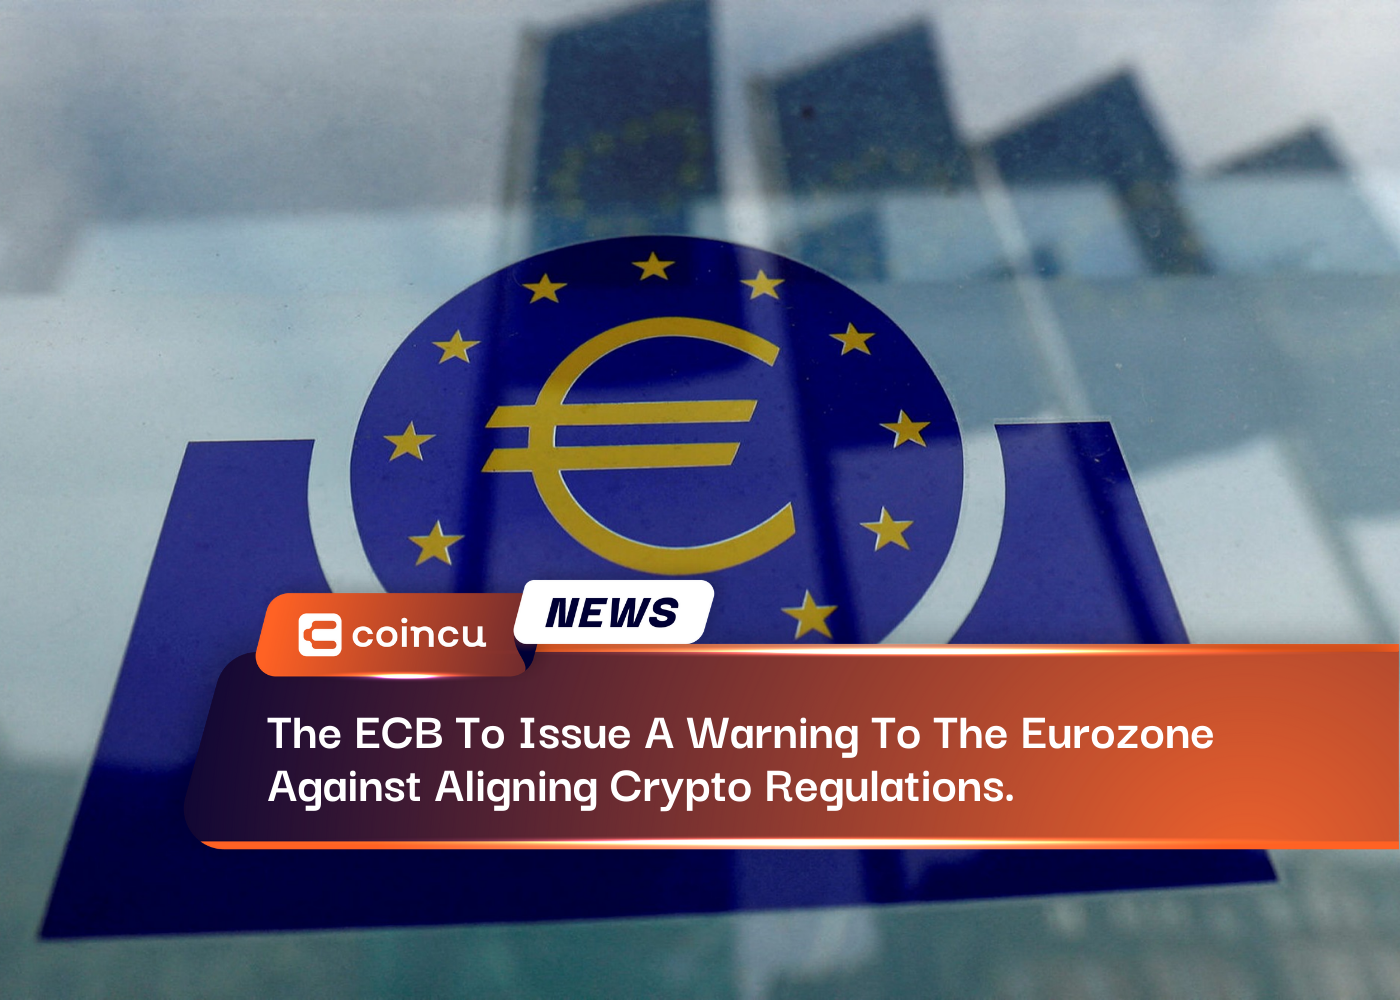 The ECB To Issue A Warning To The Eurozone Against Aligning Crypto Regulations.